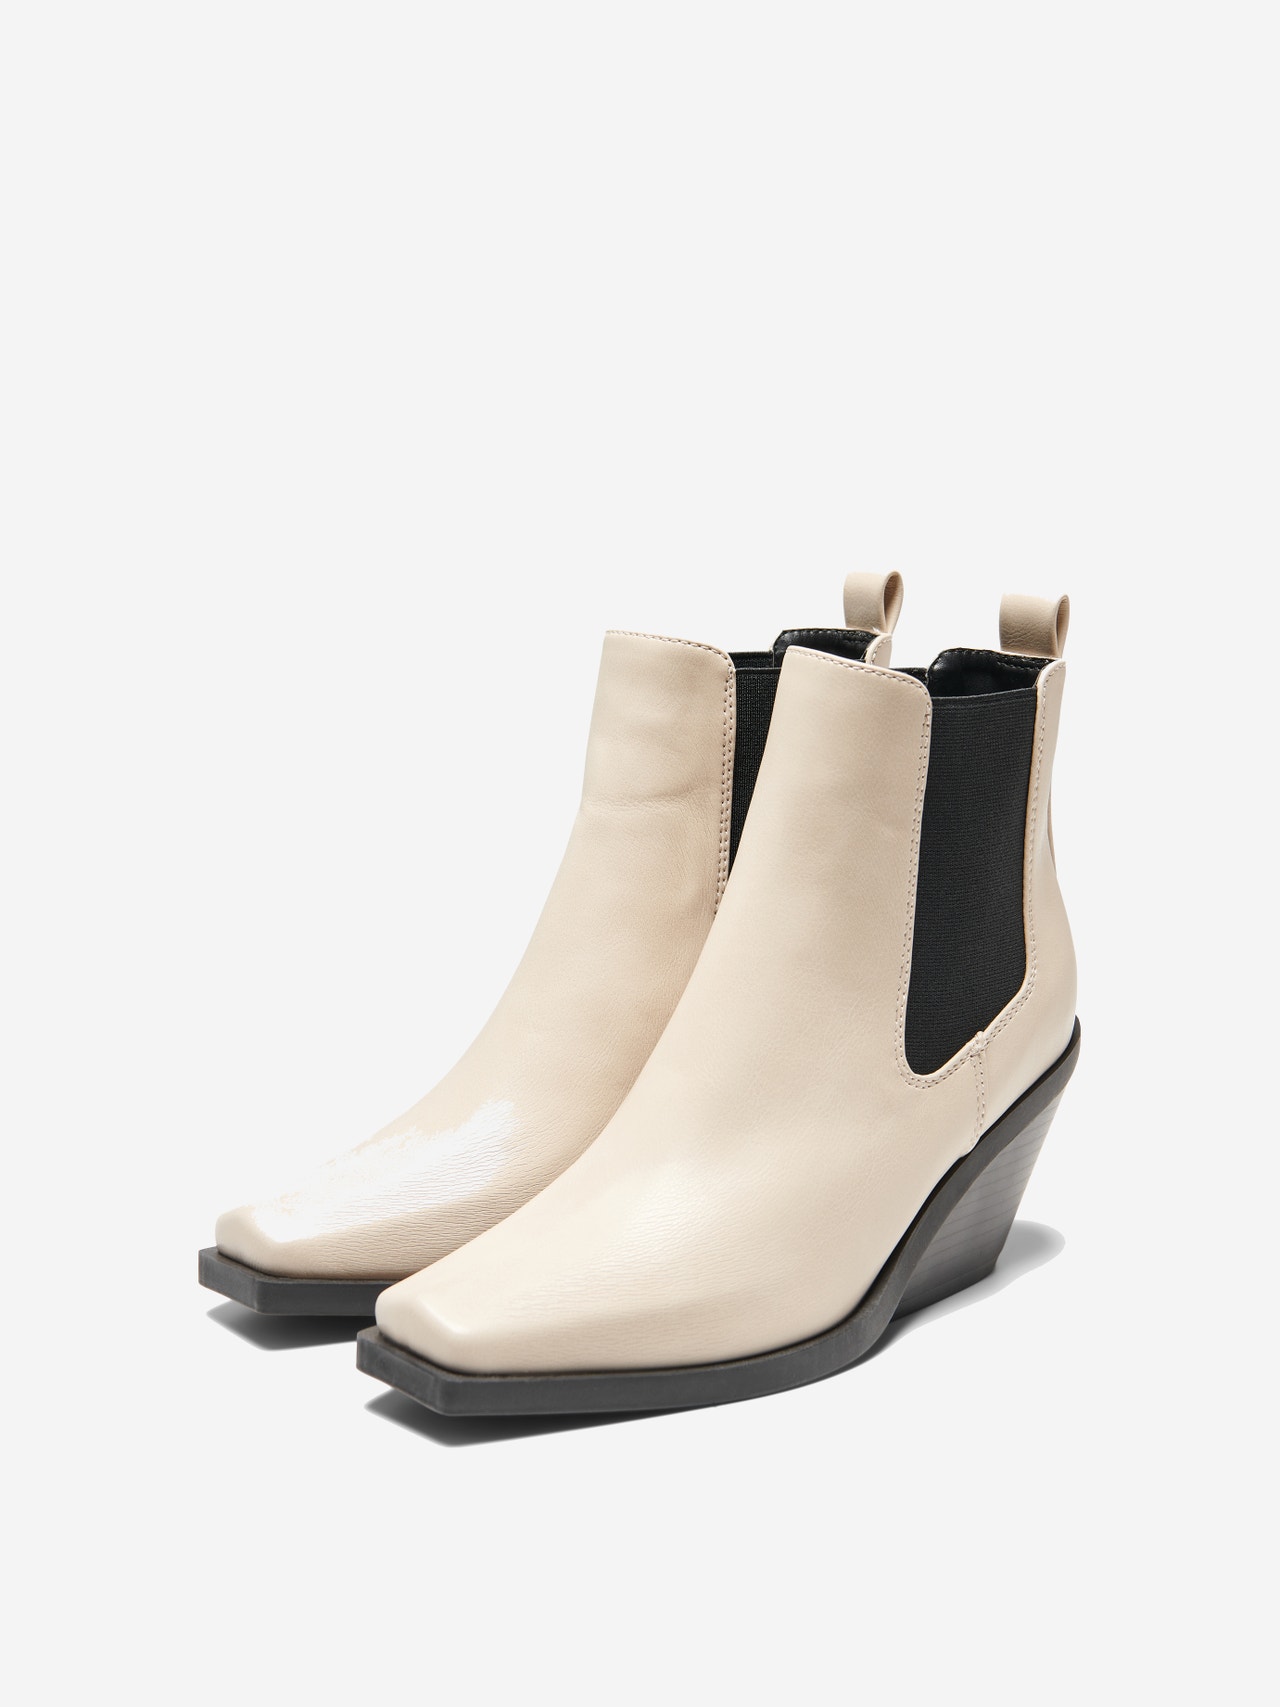 ONLY Heeled Boots -Creme - 15271718